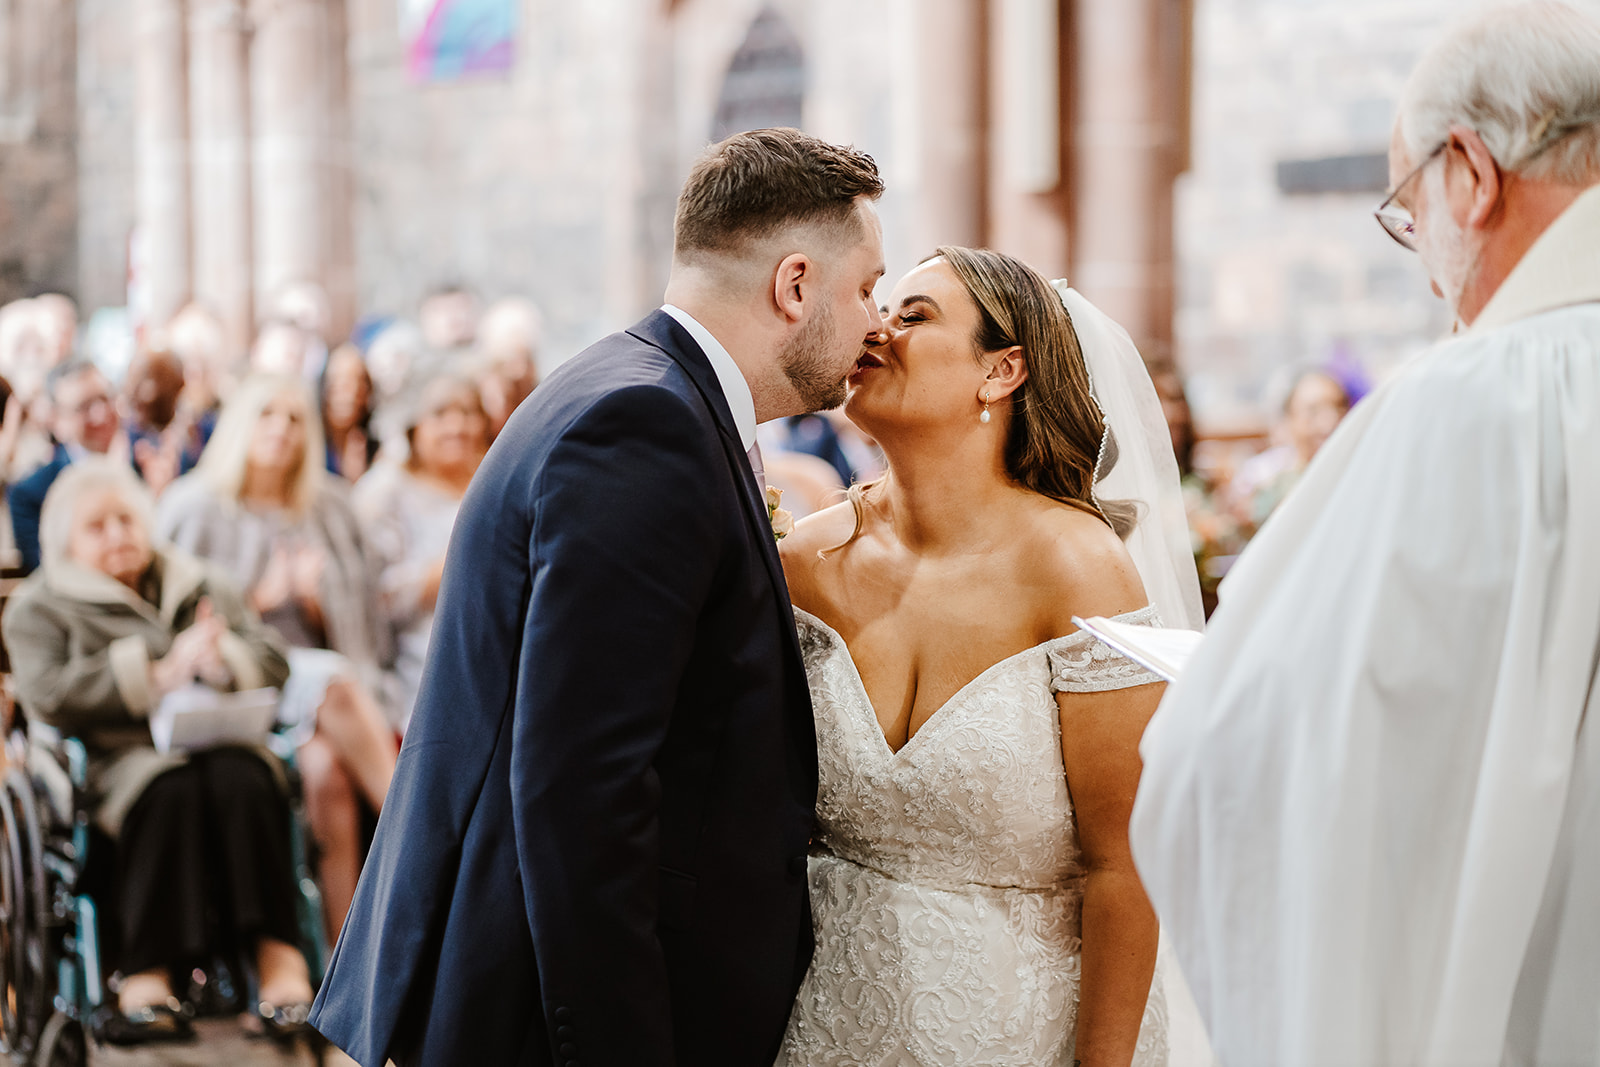 Bride and groom share first kiss